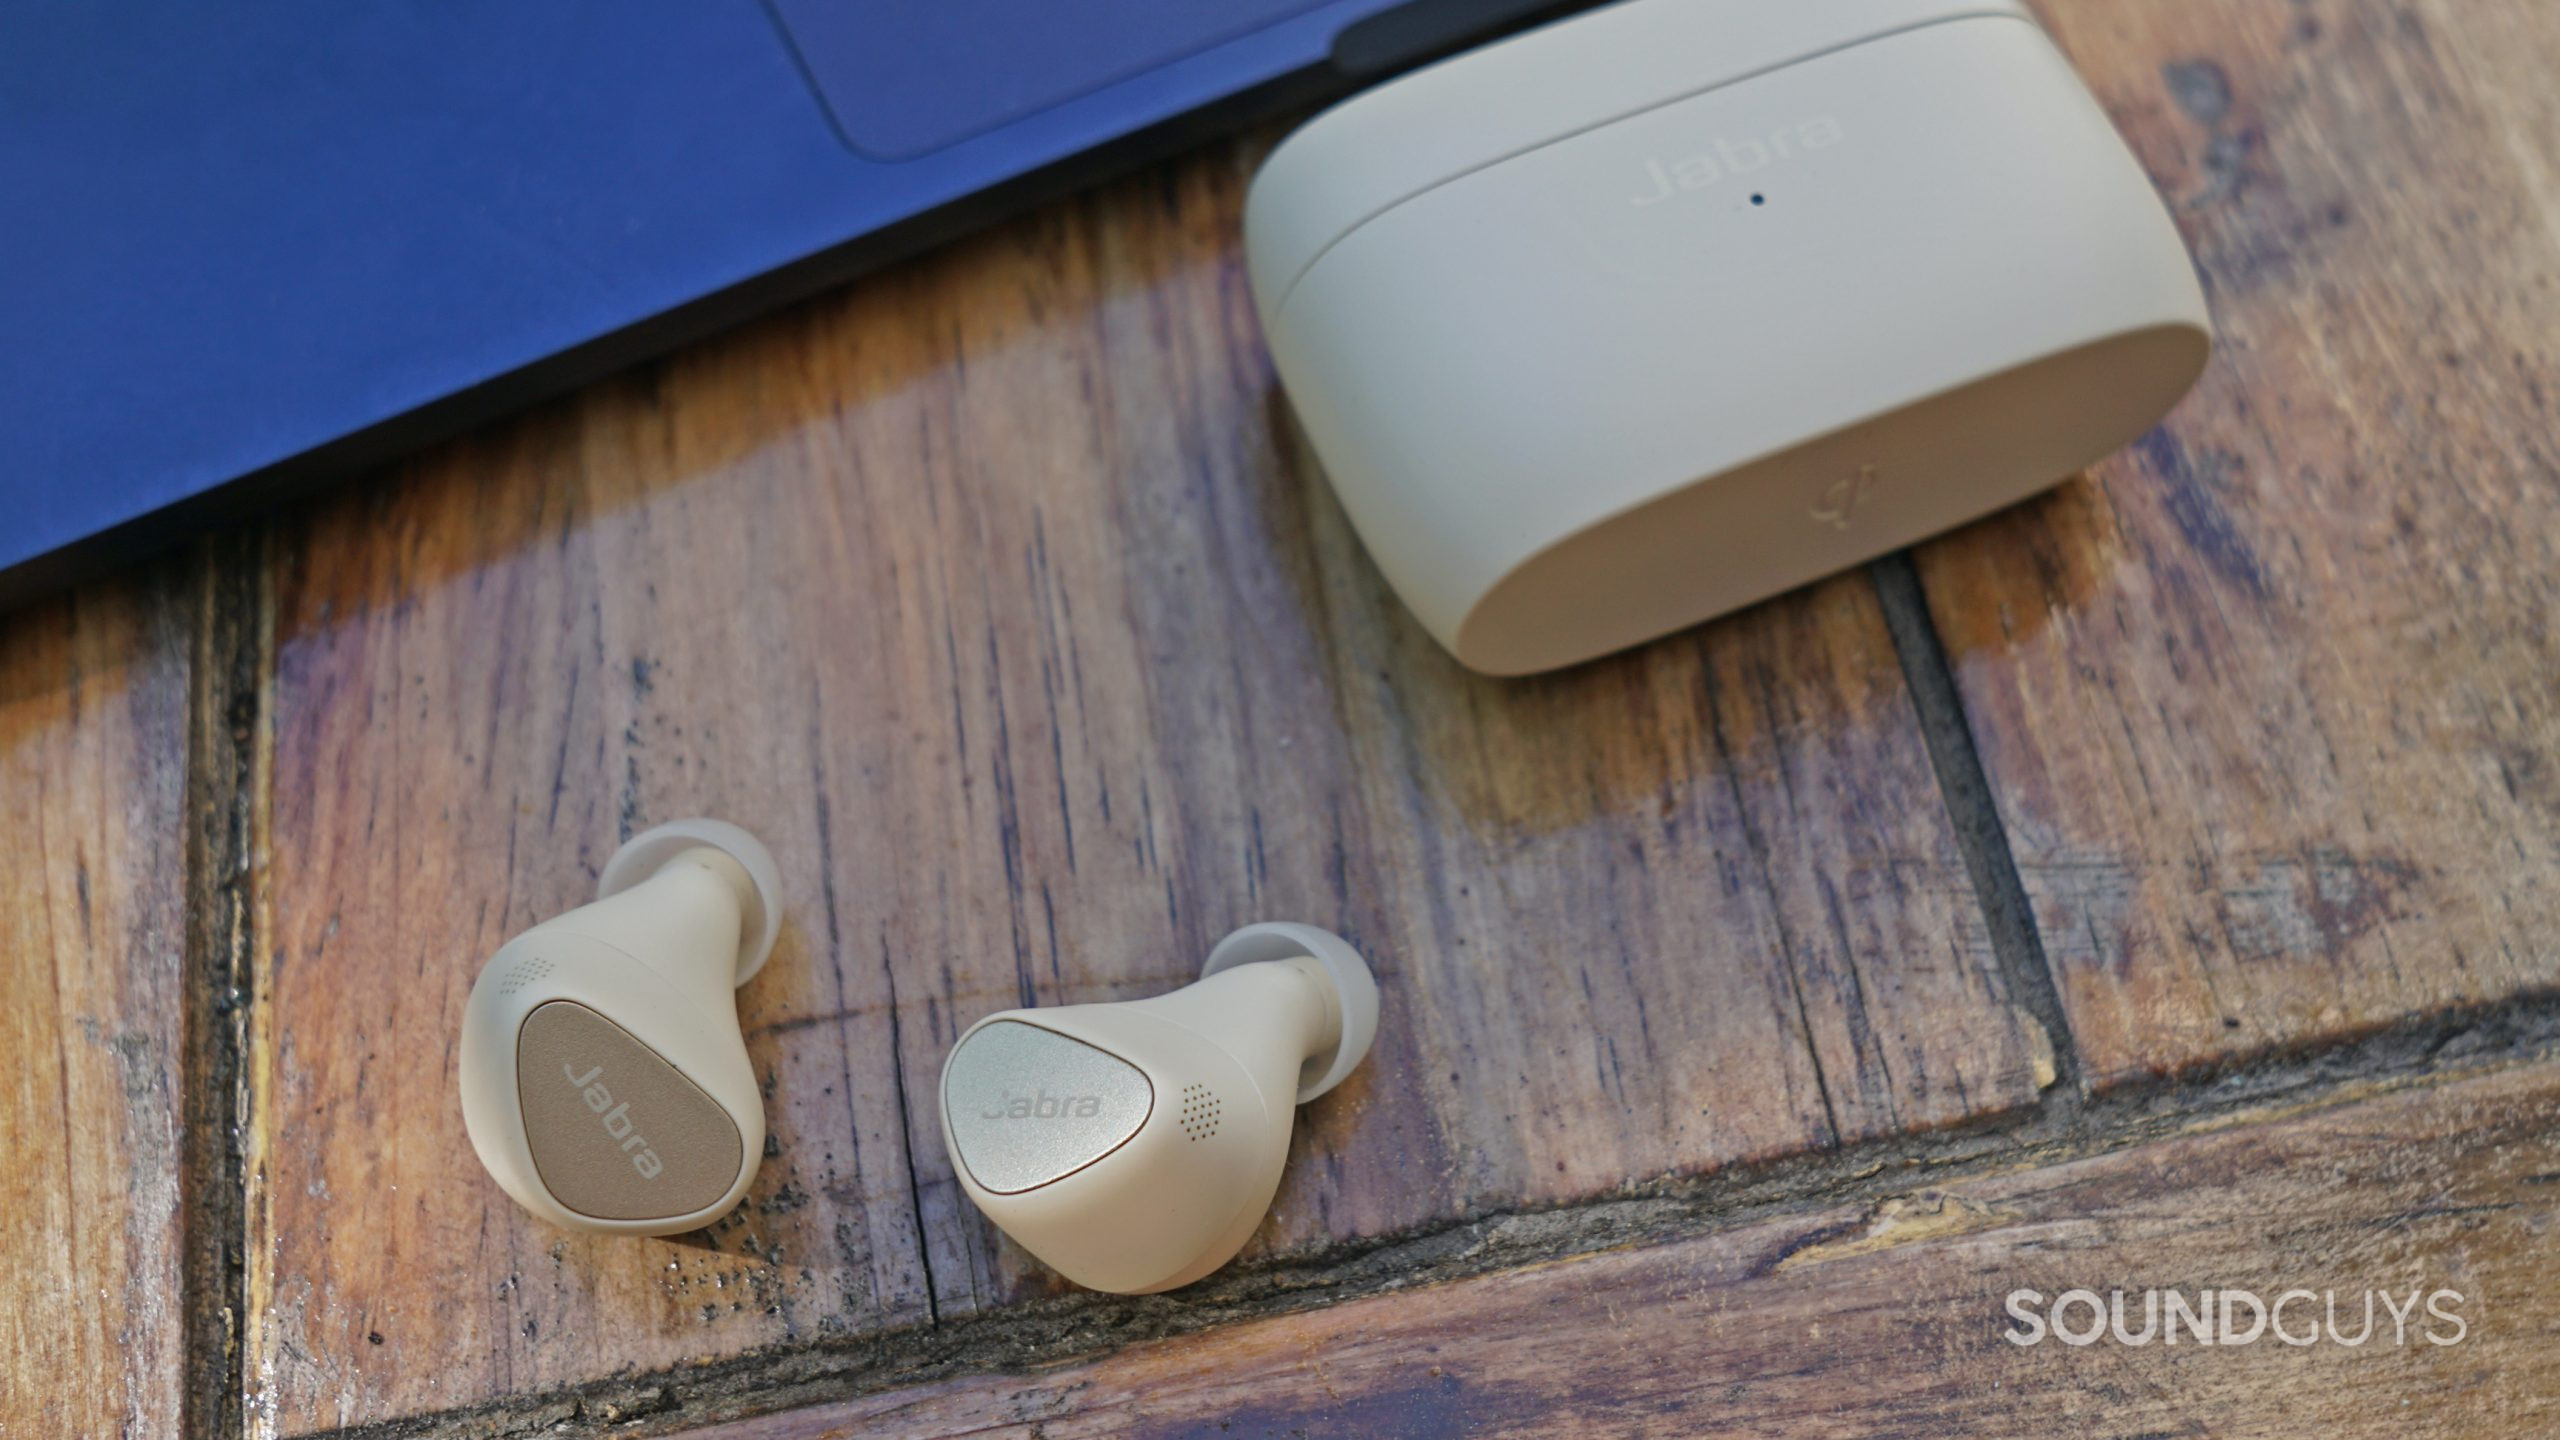 The Jabra Elite 5 true wireless earbuds lay on a wooden table next to its charging case and an Apple MacBook Air